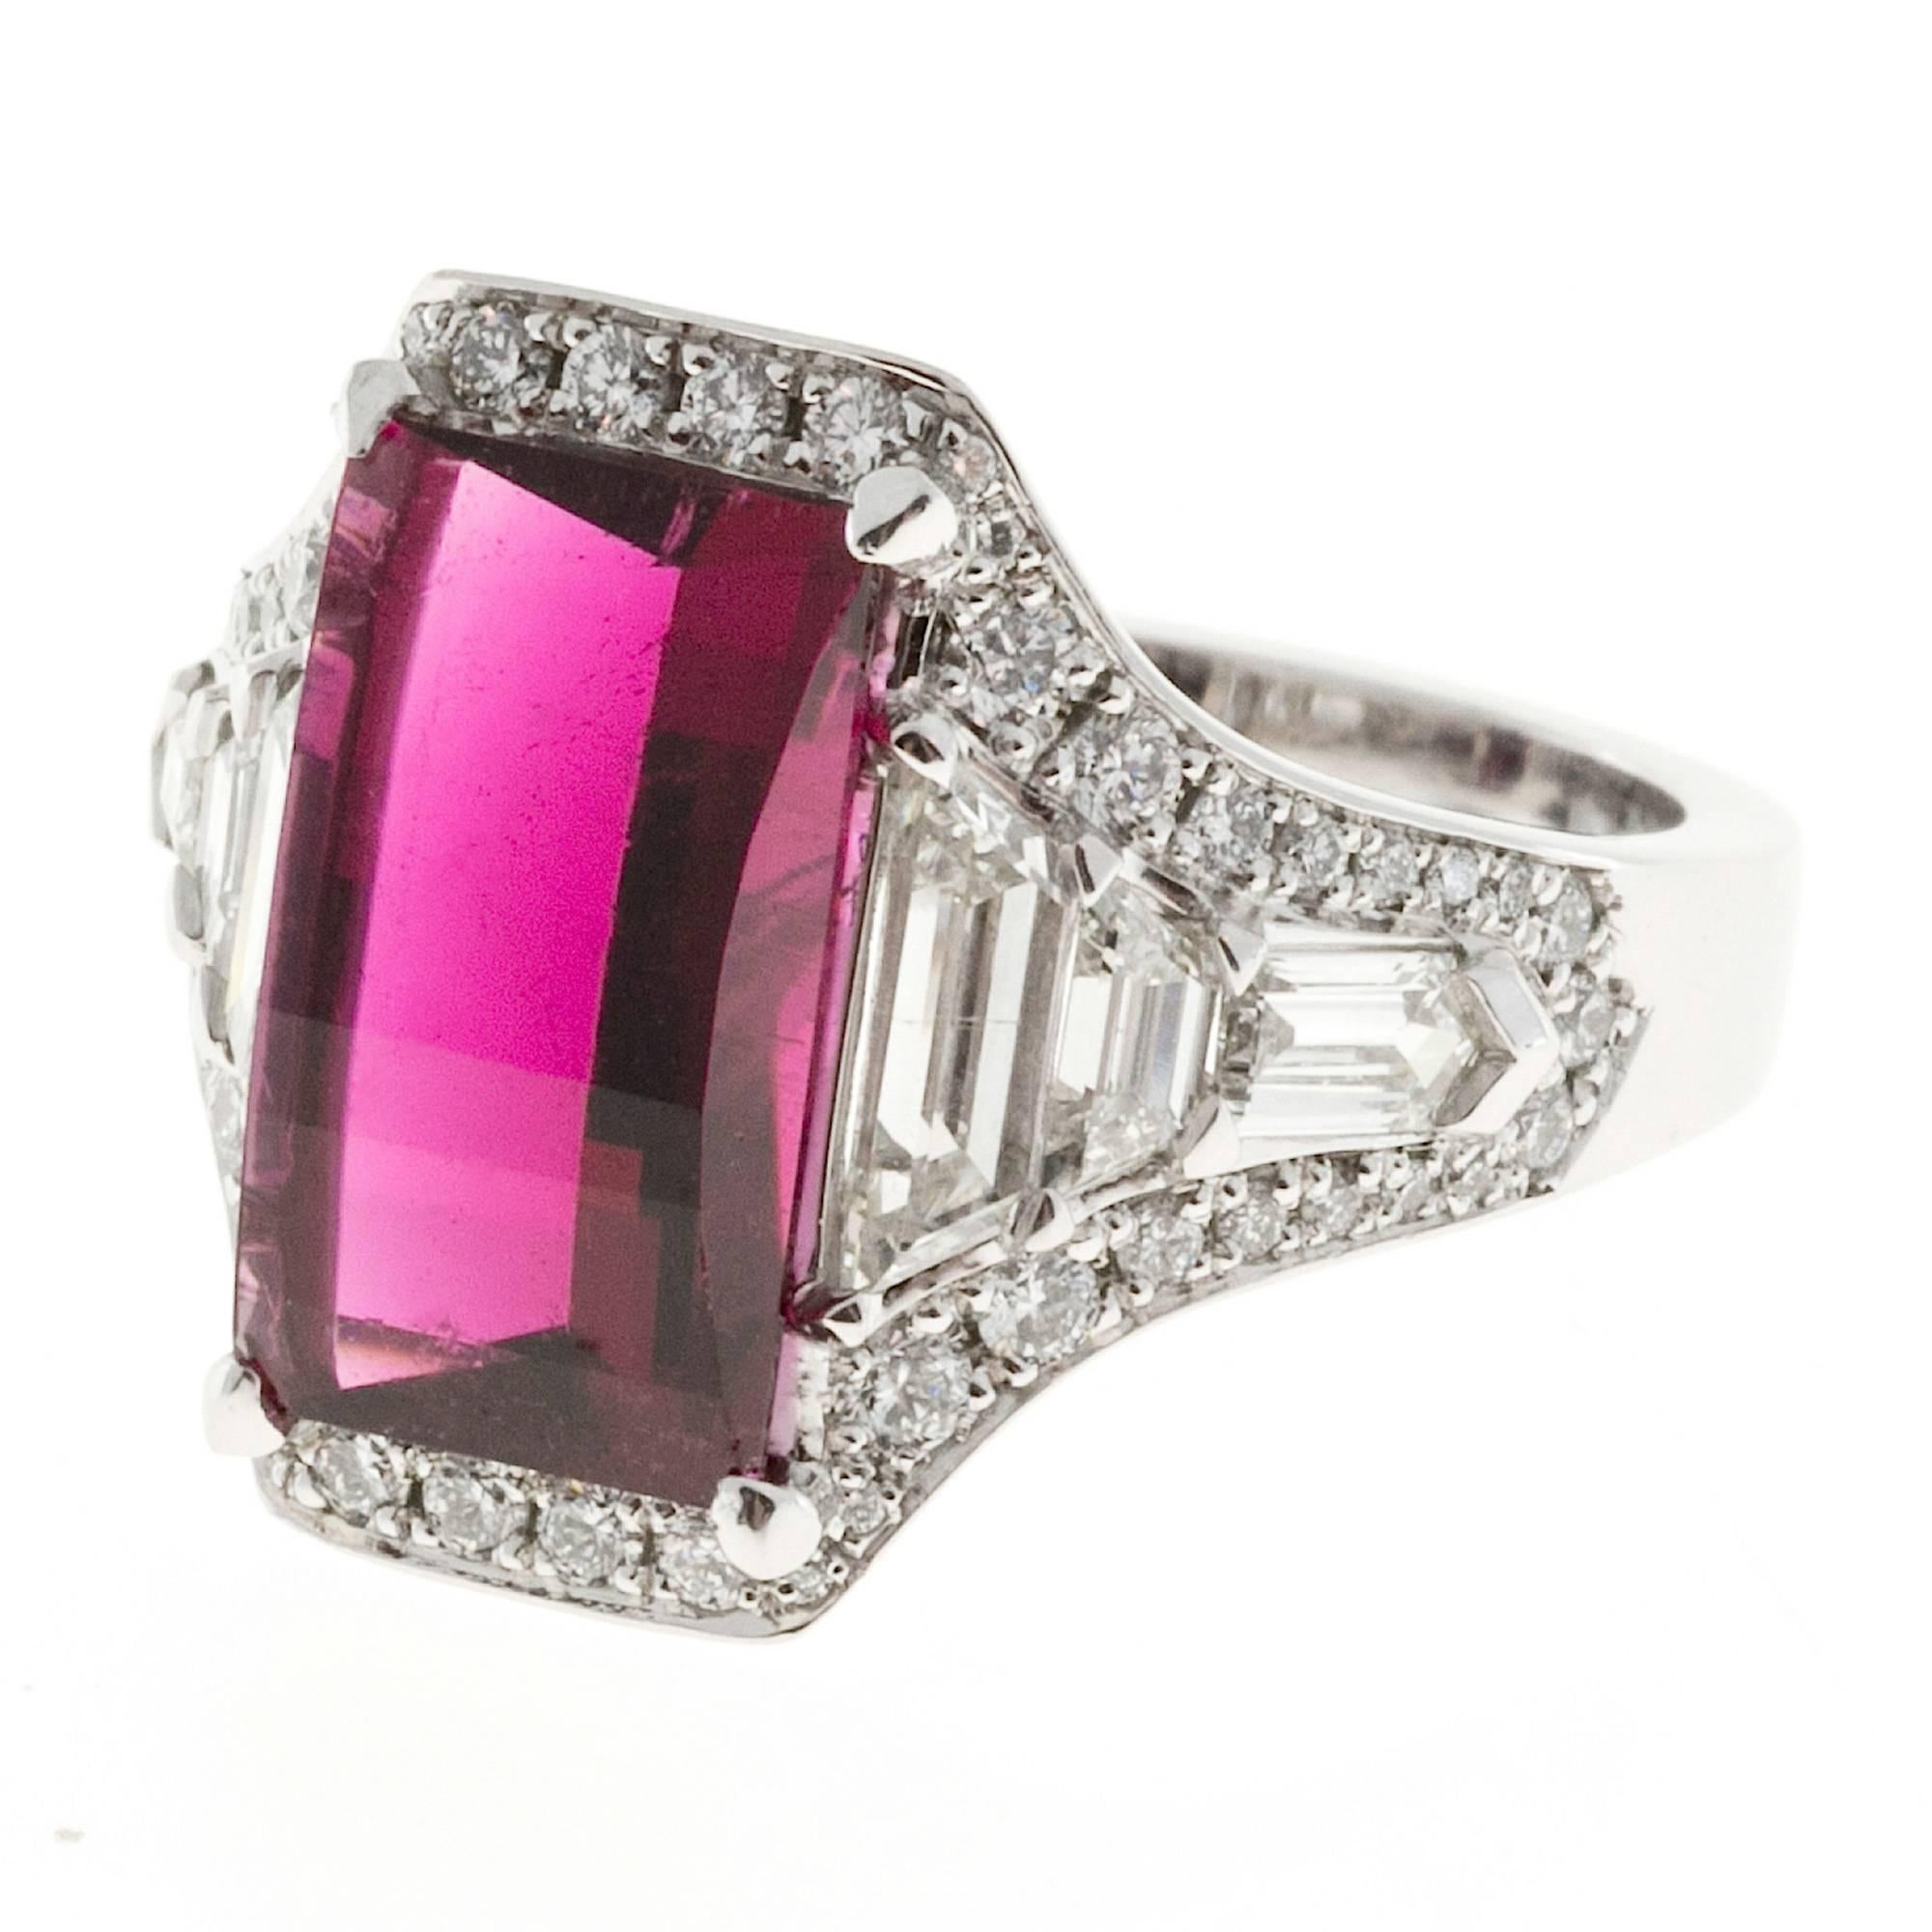 Rubellite Red Tourmaline Diamond Platinum Engagement Ring In Good Condition For Sale In Stamford, CT